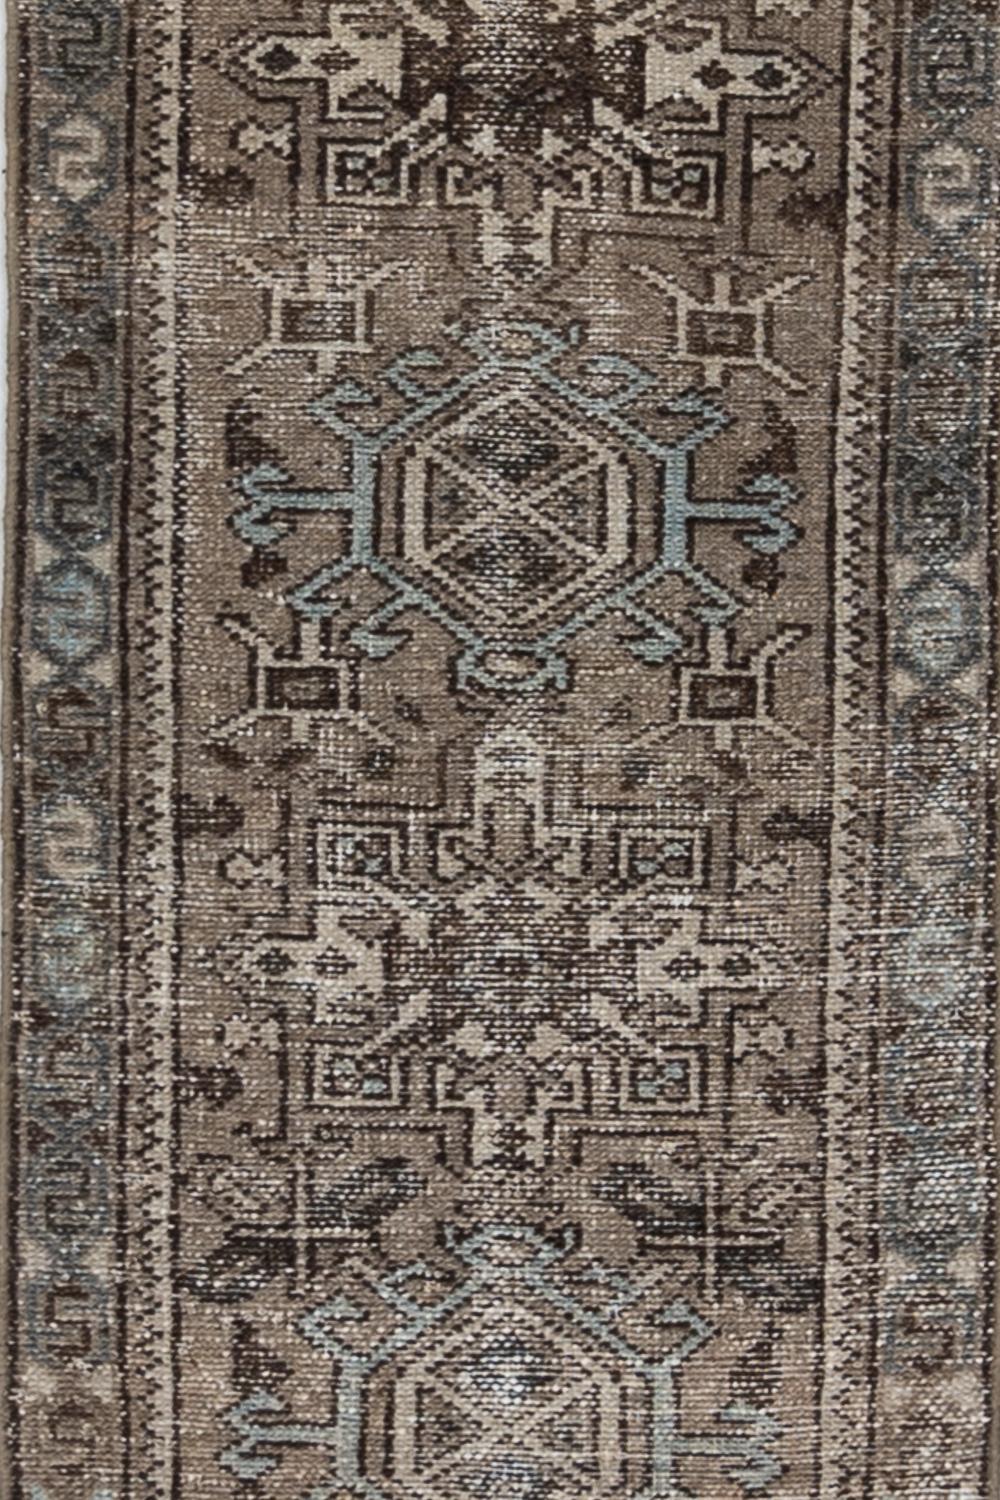 Age: 1930

Pile: Low

Wear Notes: 2

Material: Wool on Cotton

Vintage rugs are made by hand over the course of months, sometimes years. Their imperfections and wear are evidence of the hard working human hands that made them and the